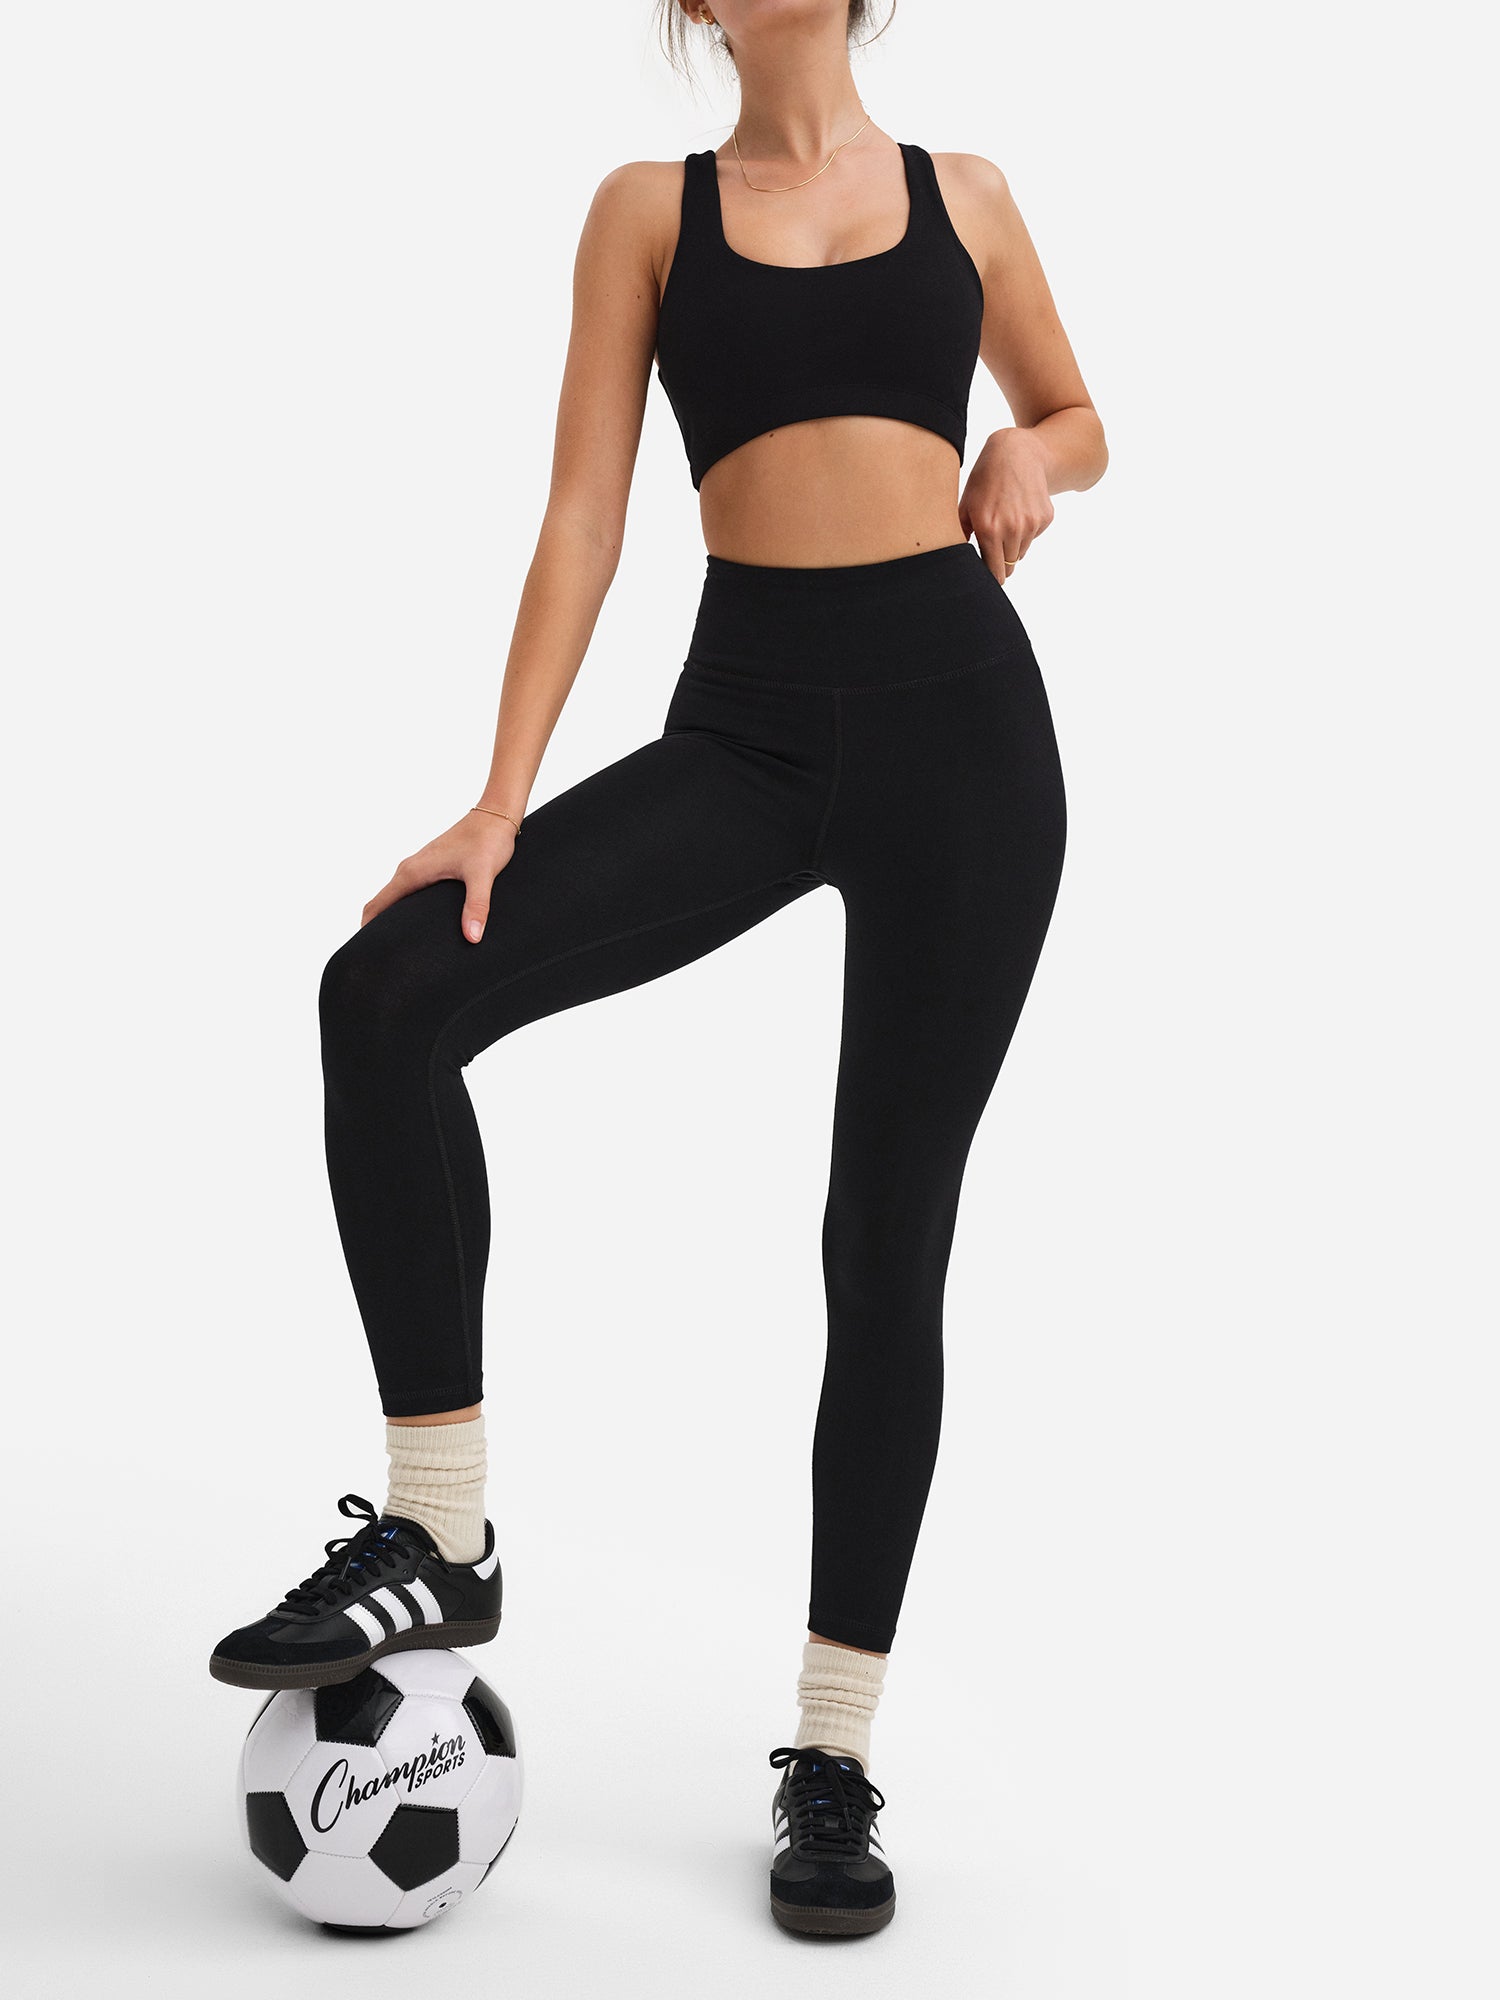 Stretched Activewear Sports Bra Yoga Pants Leggings Set Manufacturer in  USA, Australia, Canada, UAE and Europe